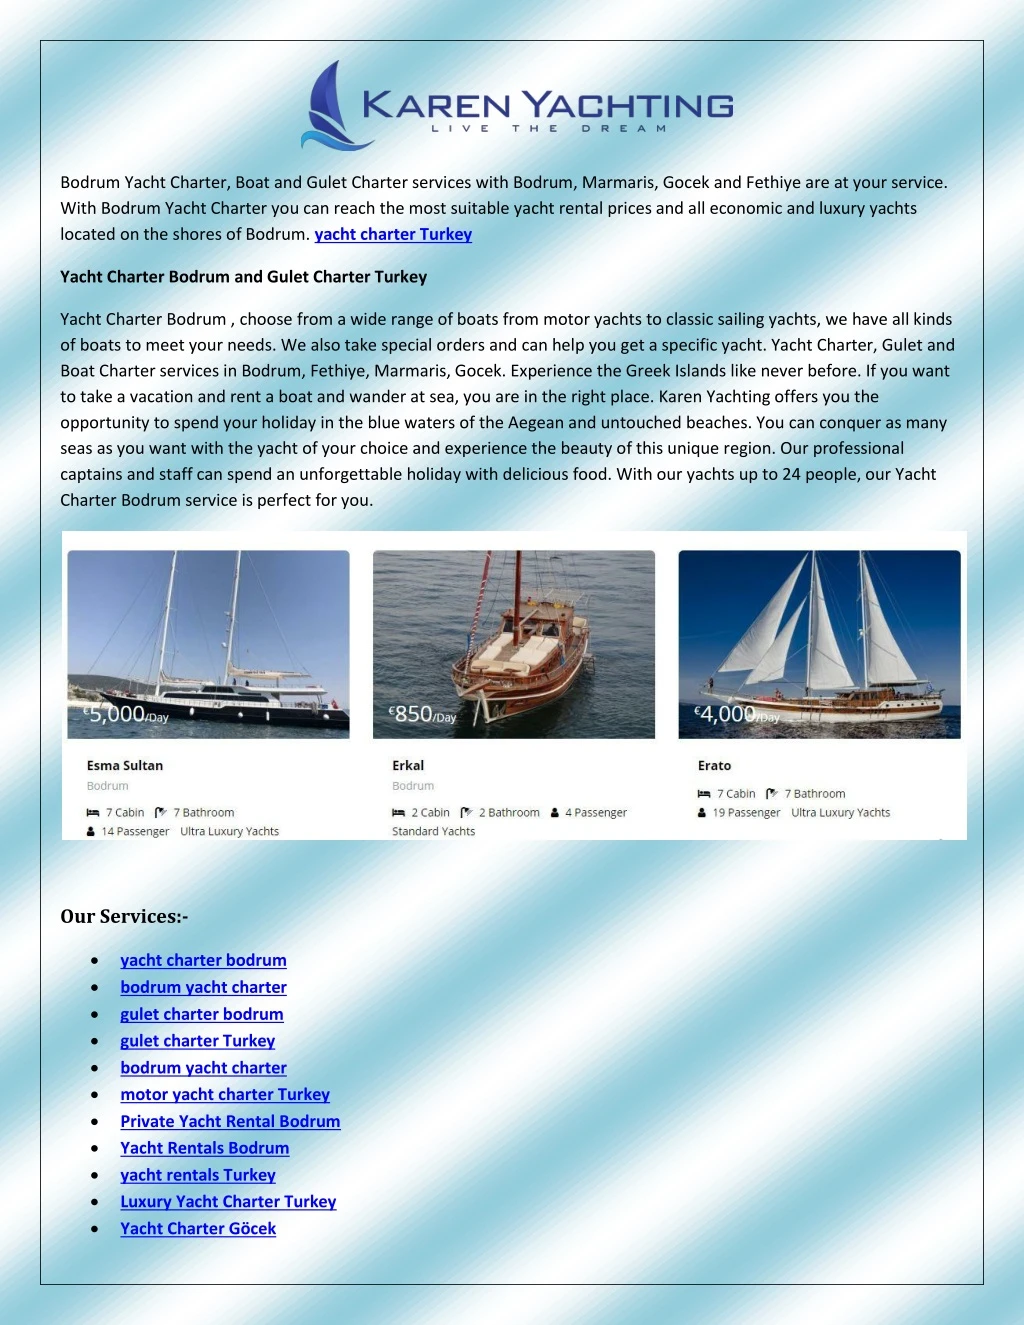 bodrum yacht charter boat and gulet charter